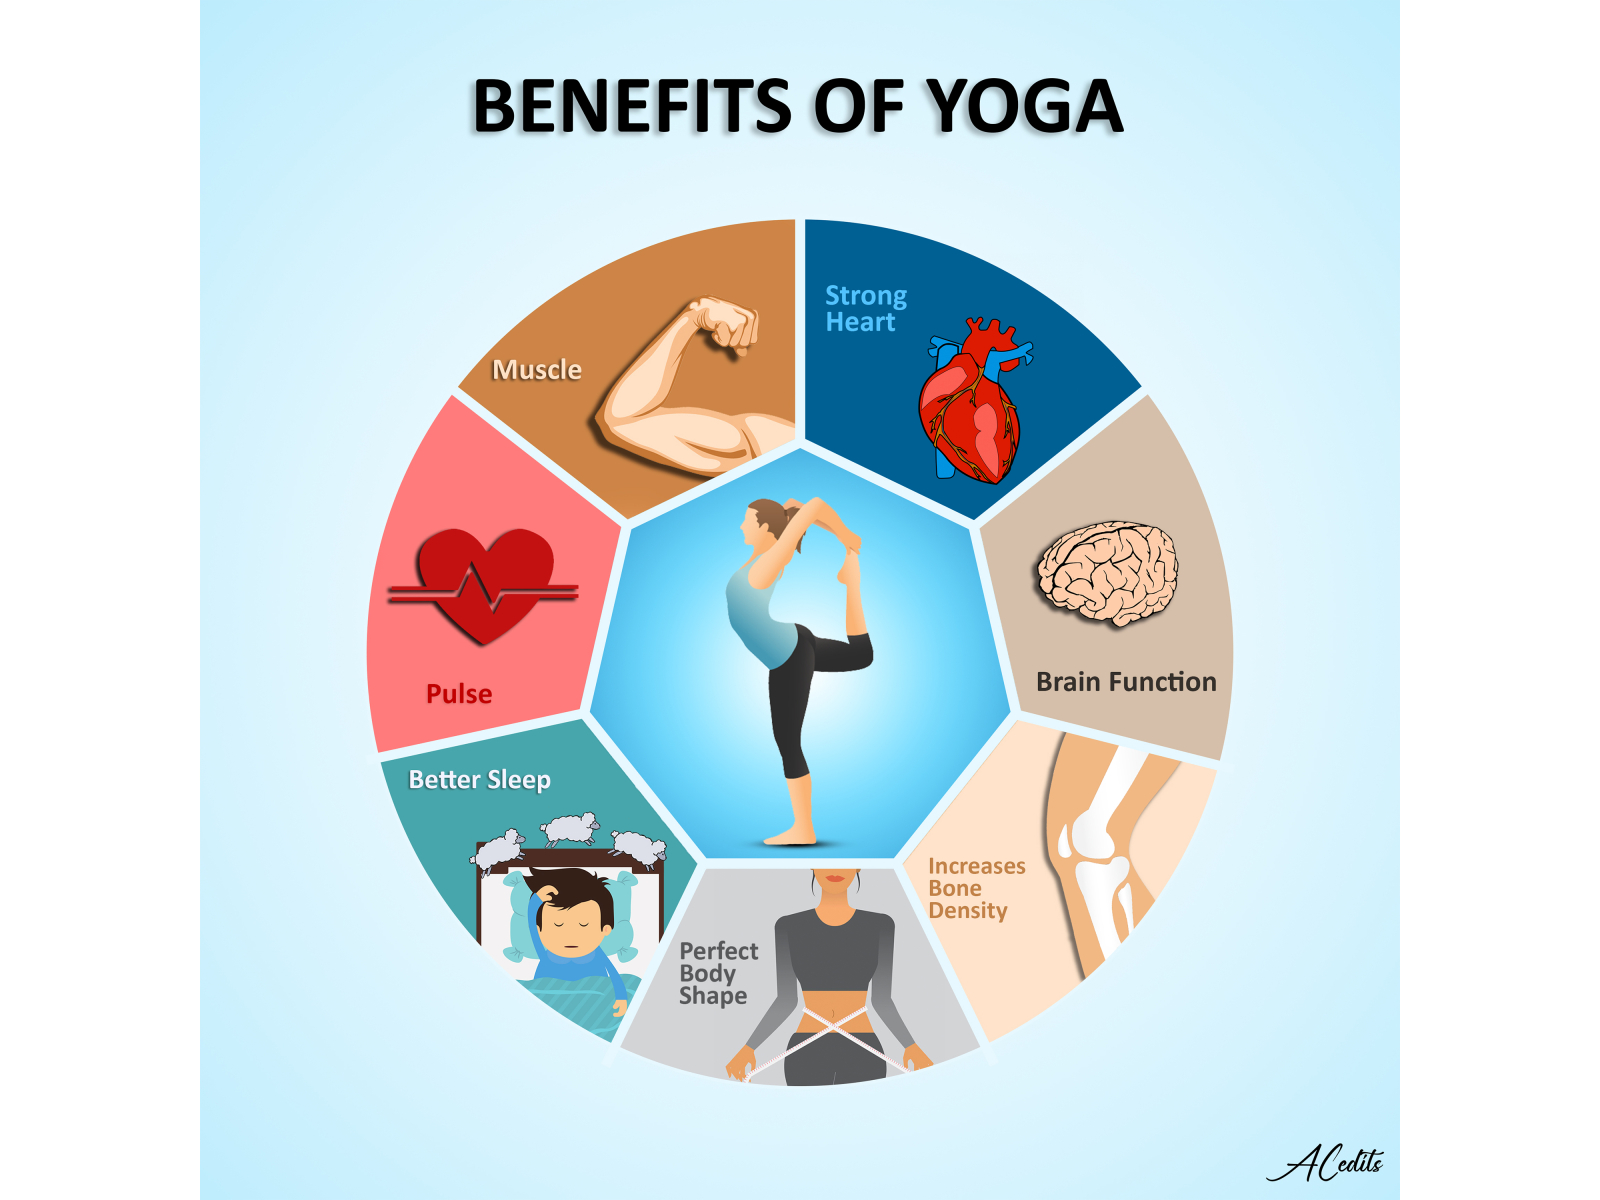 Benefits of Yoga - Illustration by Arun Choudhary on Dribbble